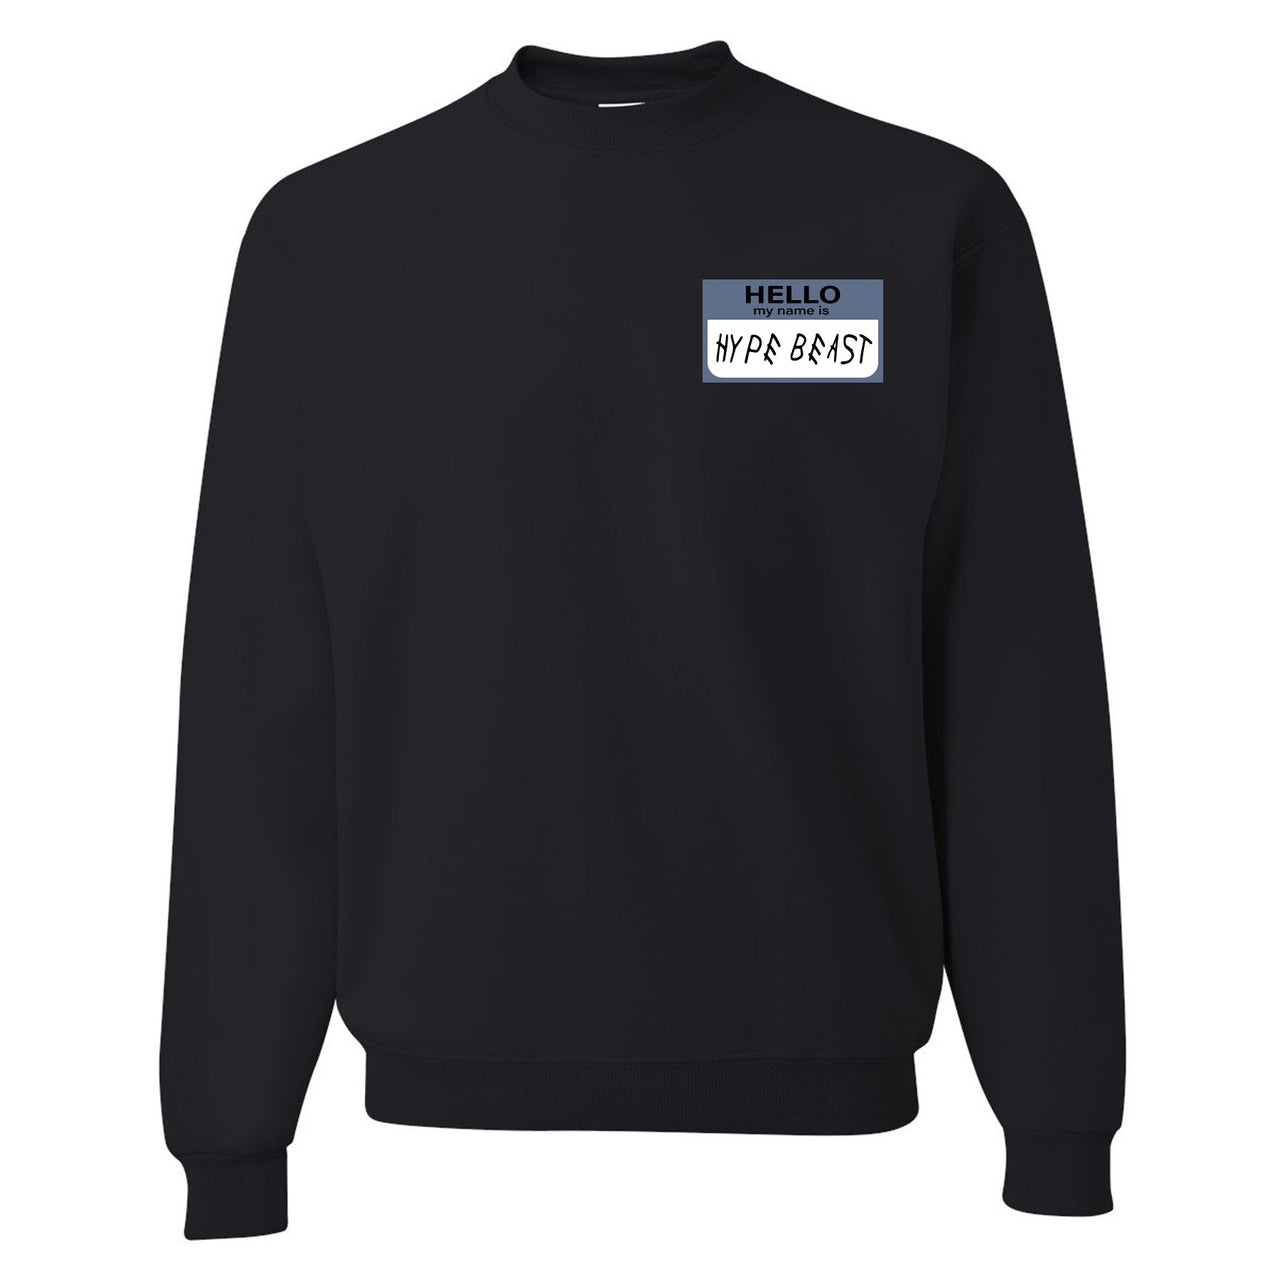 Cap and Gown 13s Crewneck Sweatshirt | Hello My Name is Hype Beast Woe Style, Black